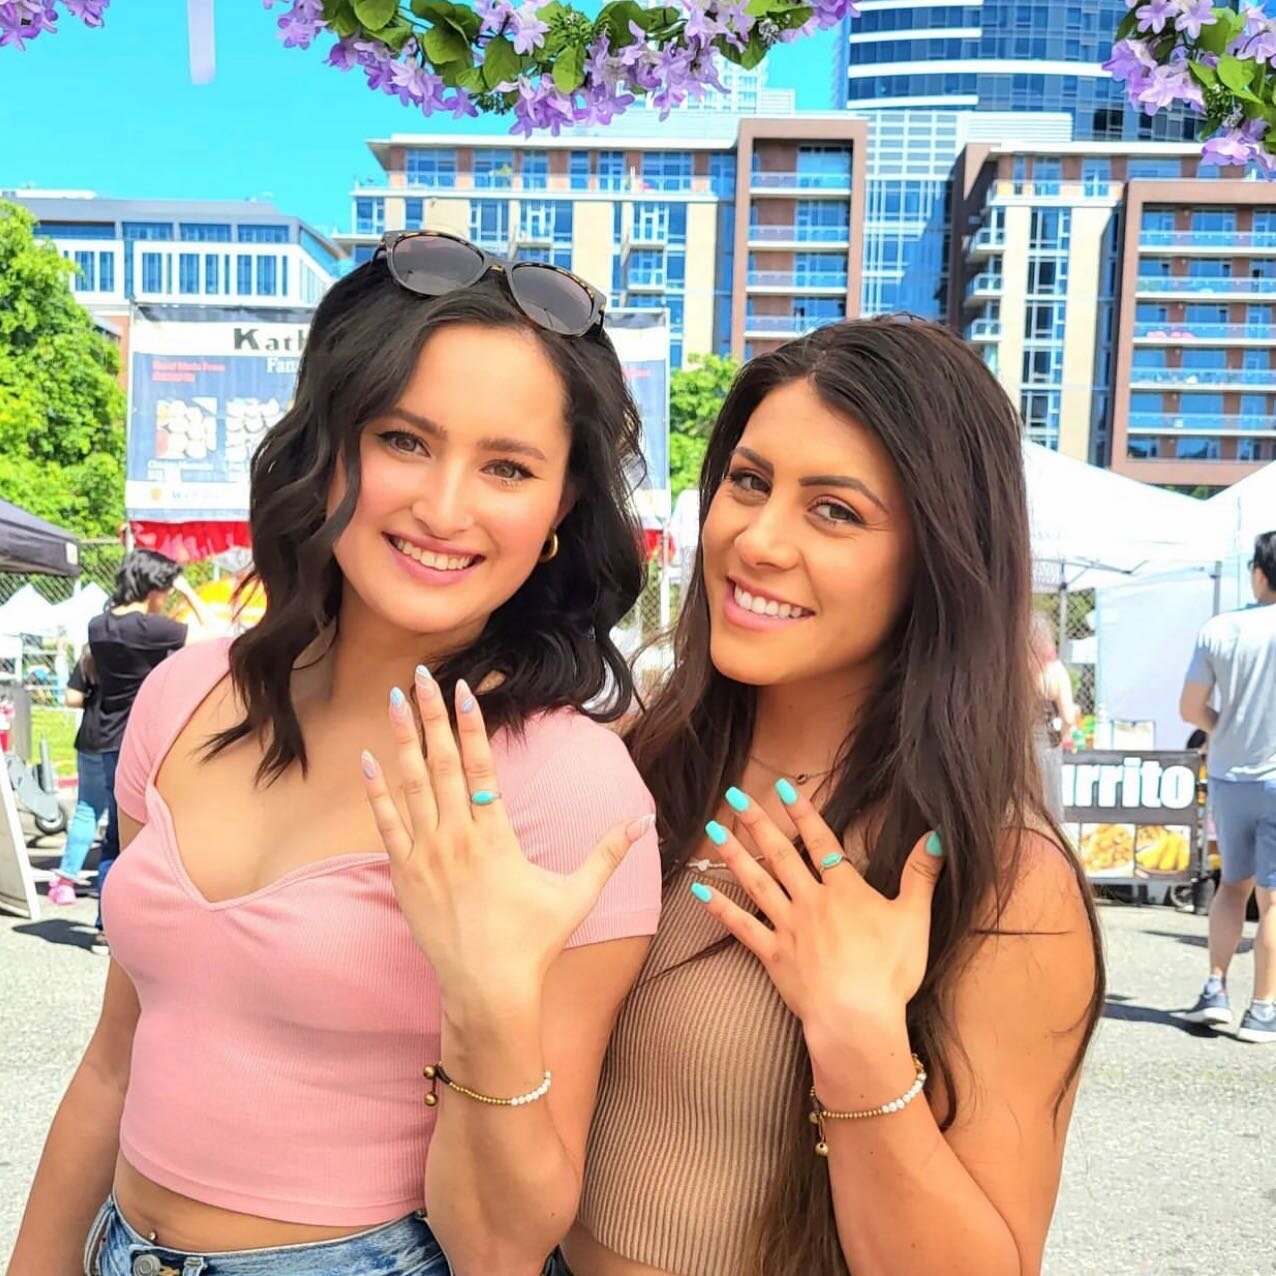 Loving all the smiles this past weekend in @southlakeunion on a hot day! Appreciate all the attendees who joined us curbside! See you all Saturday! 📸: @saktijewelry #southlakeunion #slusaturdaymarket #retailtherapy #popupshop #seattlefoodie #seattle